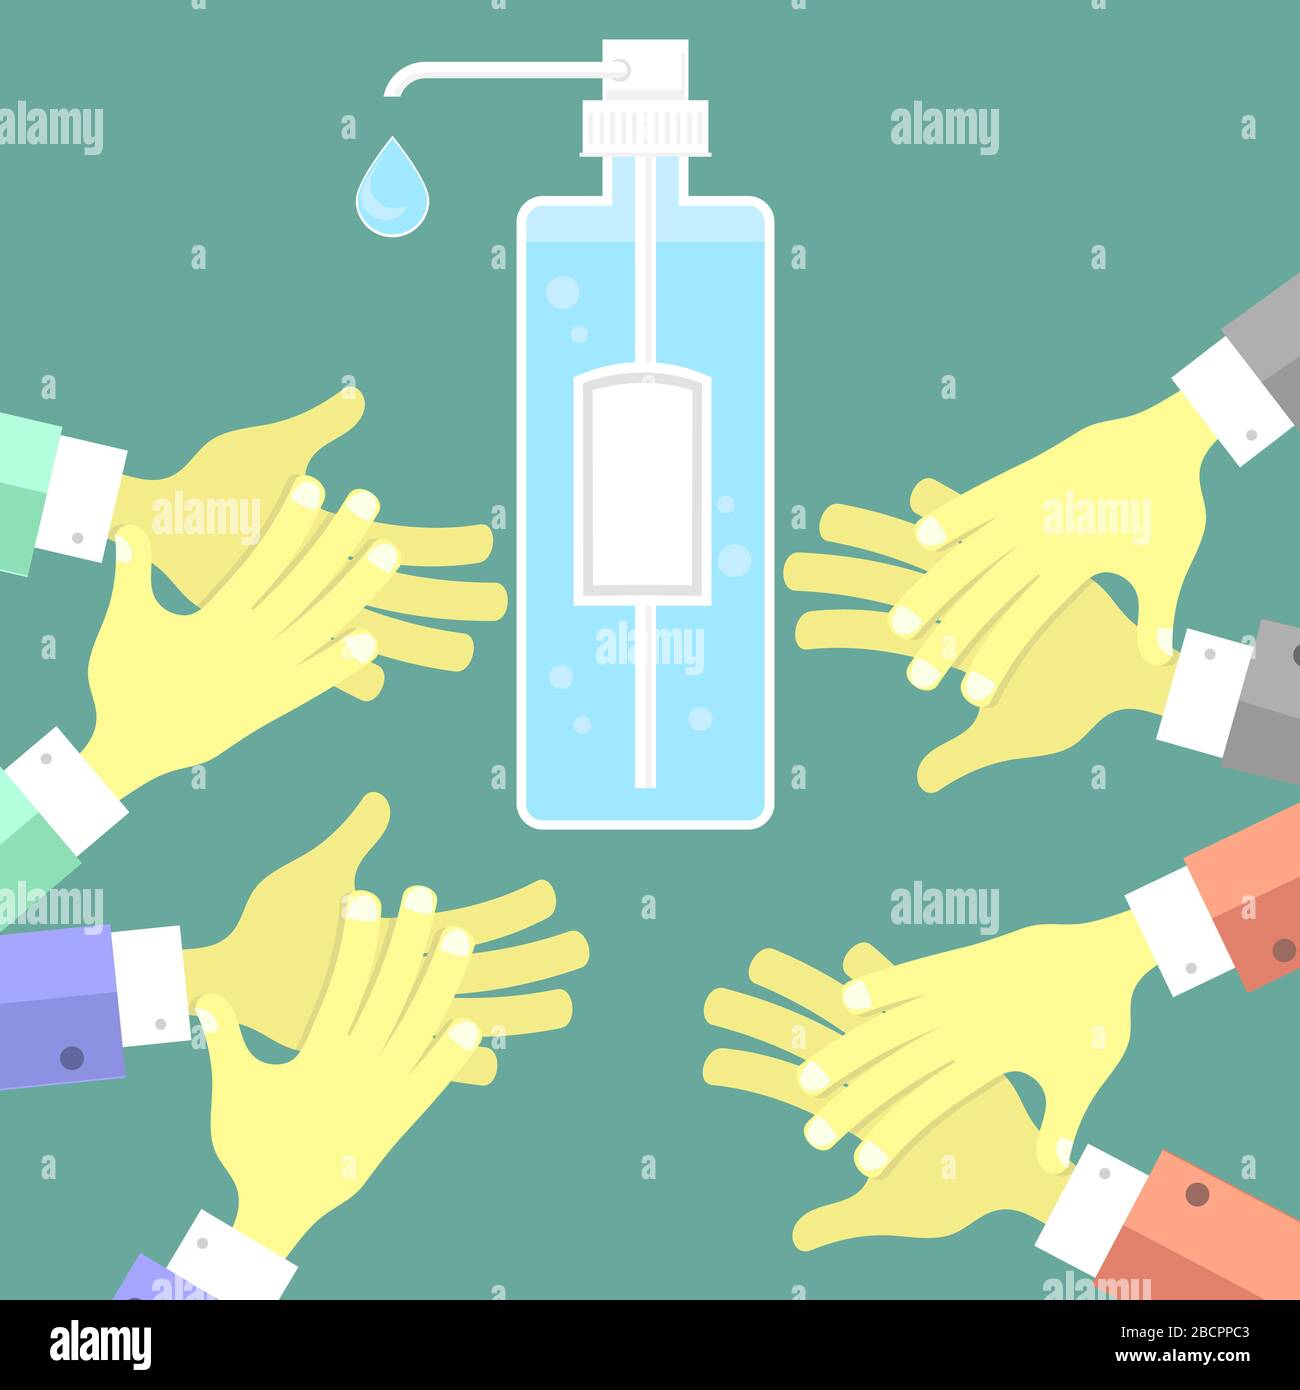 Hand Wash Antibacterial Gel Icon. Medical Sanitizer Symbol. Liquid Soap with Pumping from Bottle for Desinfection. Stock Vector